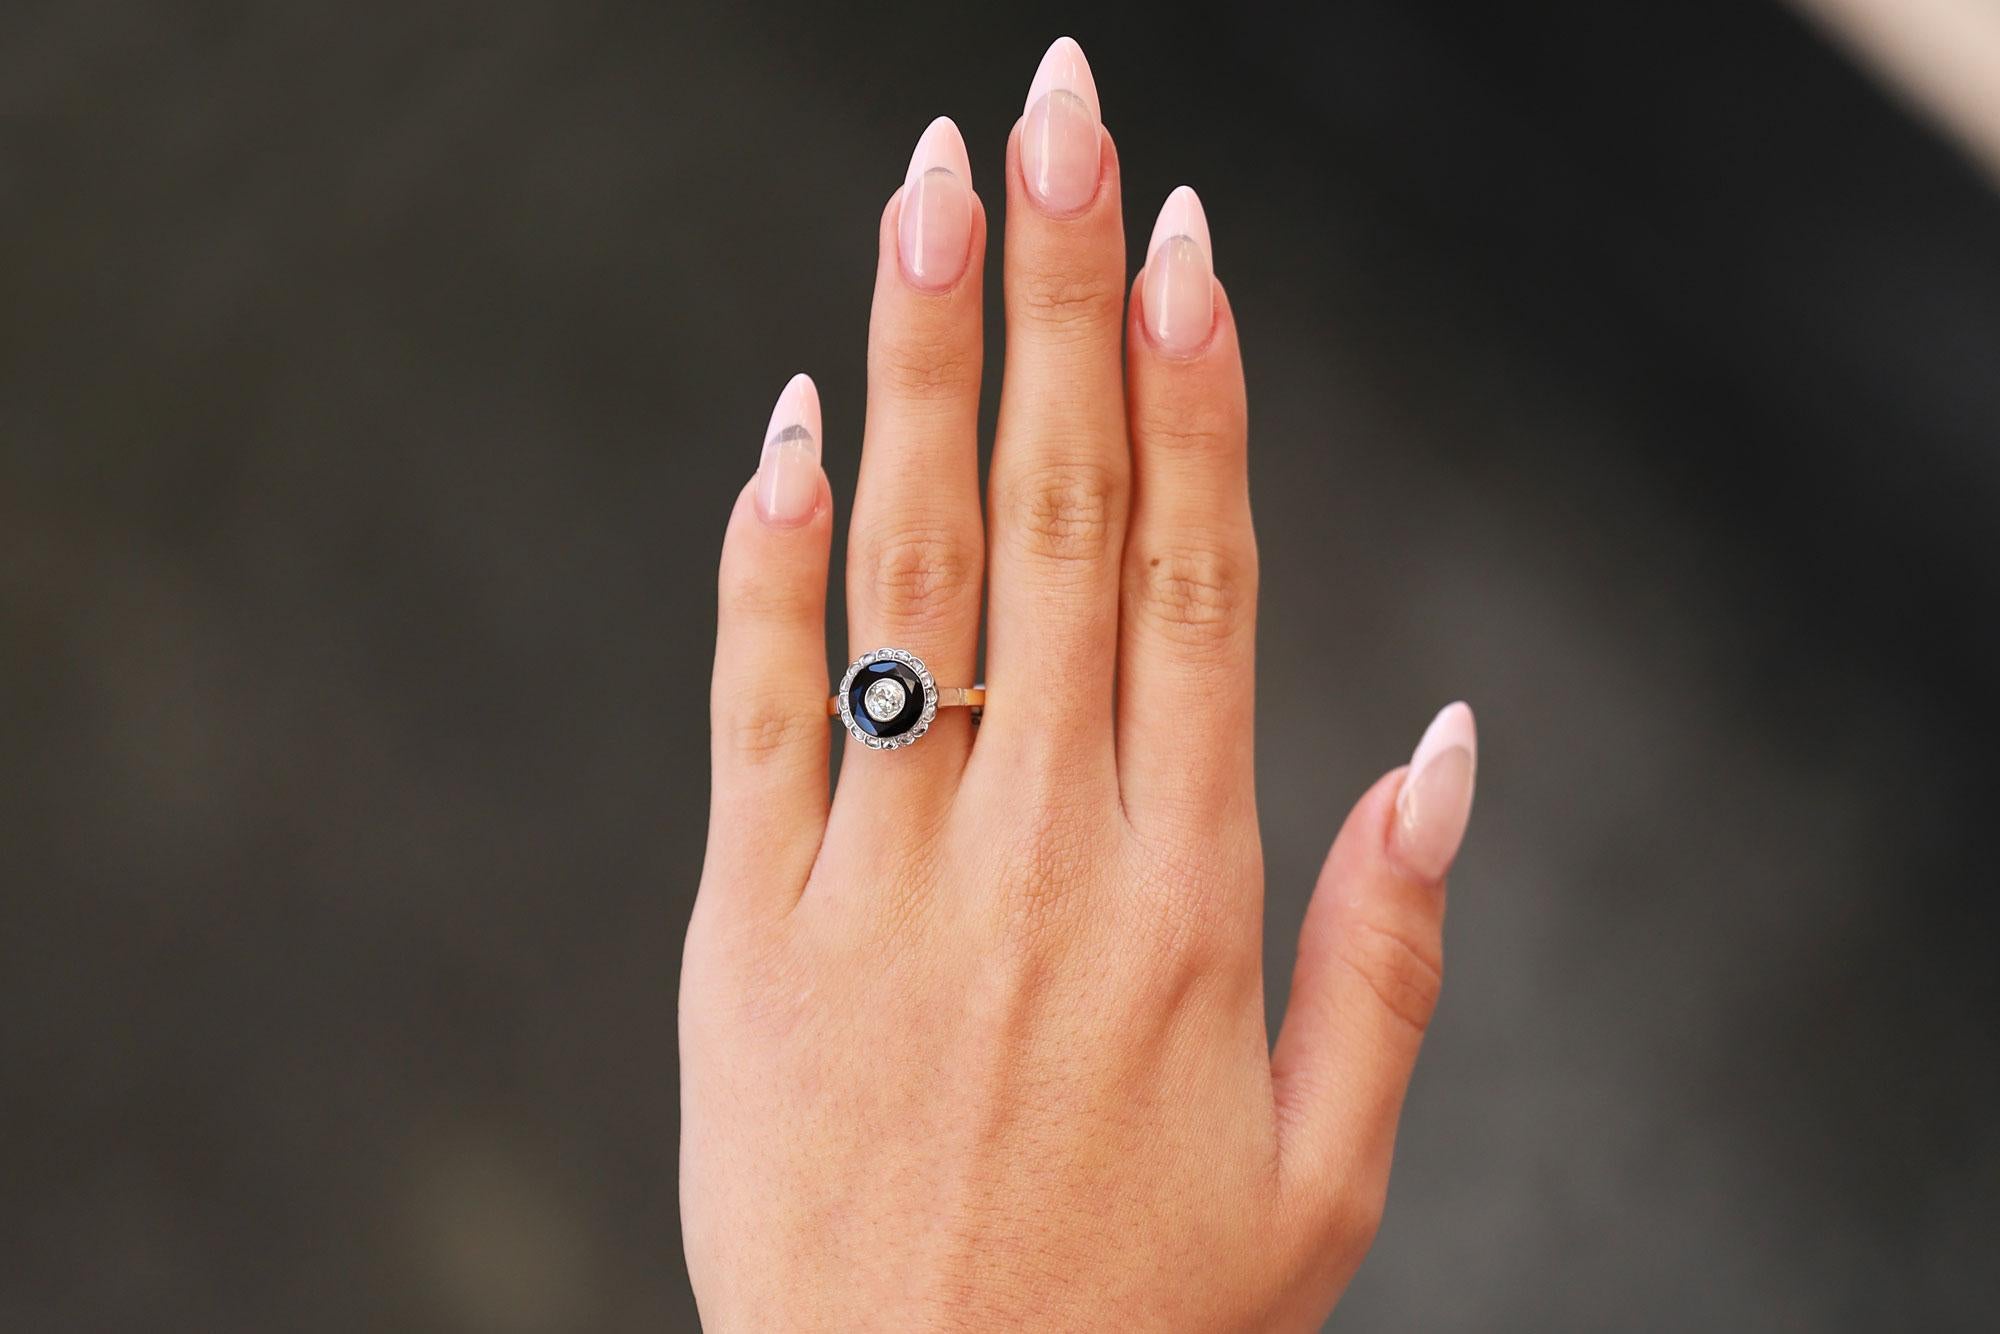 A unique and striking antique Art Deco engagement ring centered by an old mine cut diamond floating in a black onyx pool. This antique target ring displays both rich 18k yellow gold and cool platinum for a two tone vibe. The chunky main diamond set